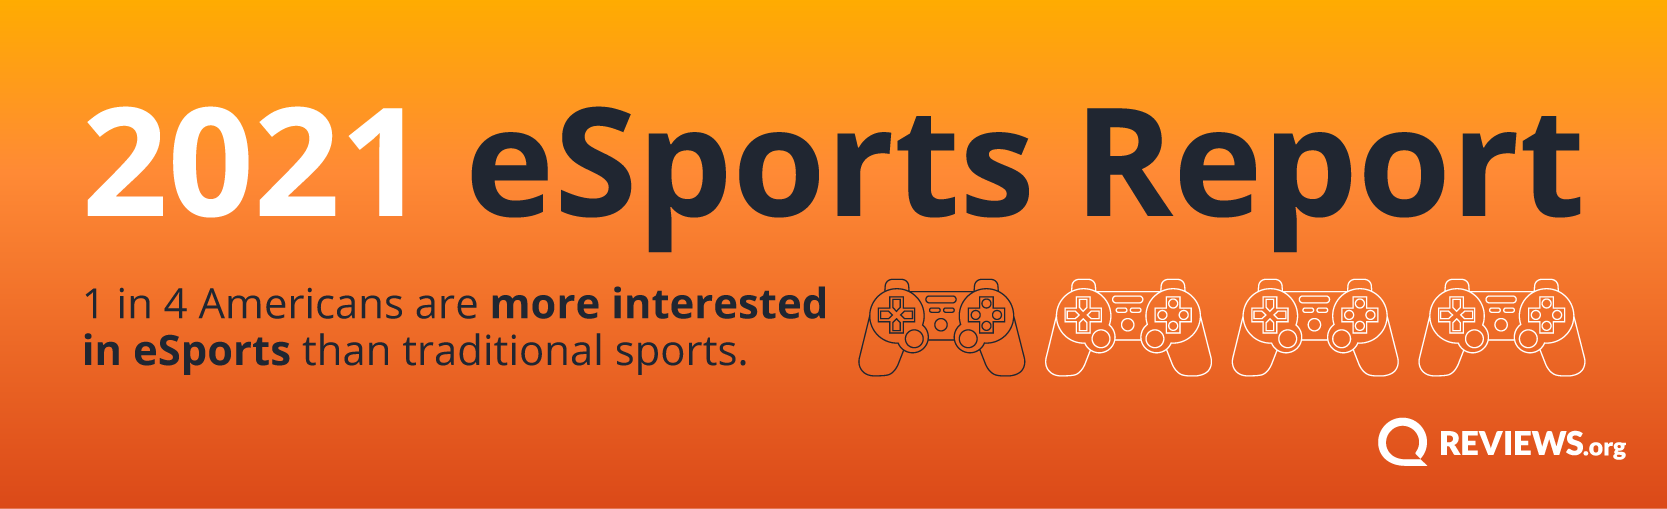 Reviews. Org releases 2021 esports report